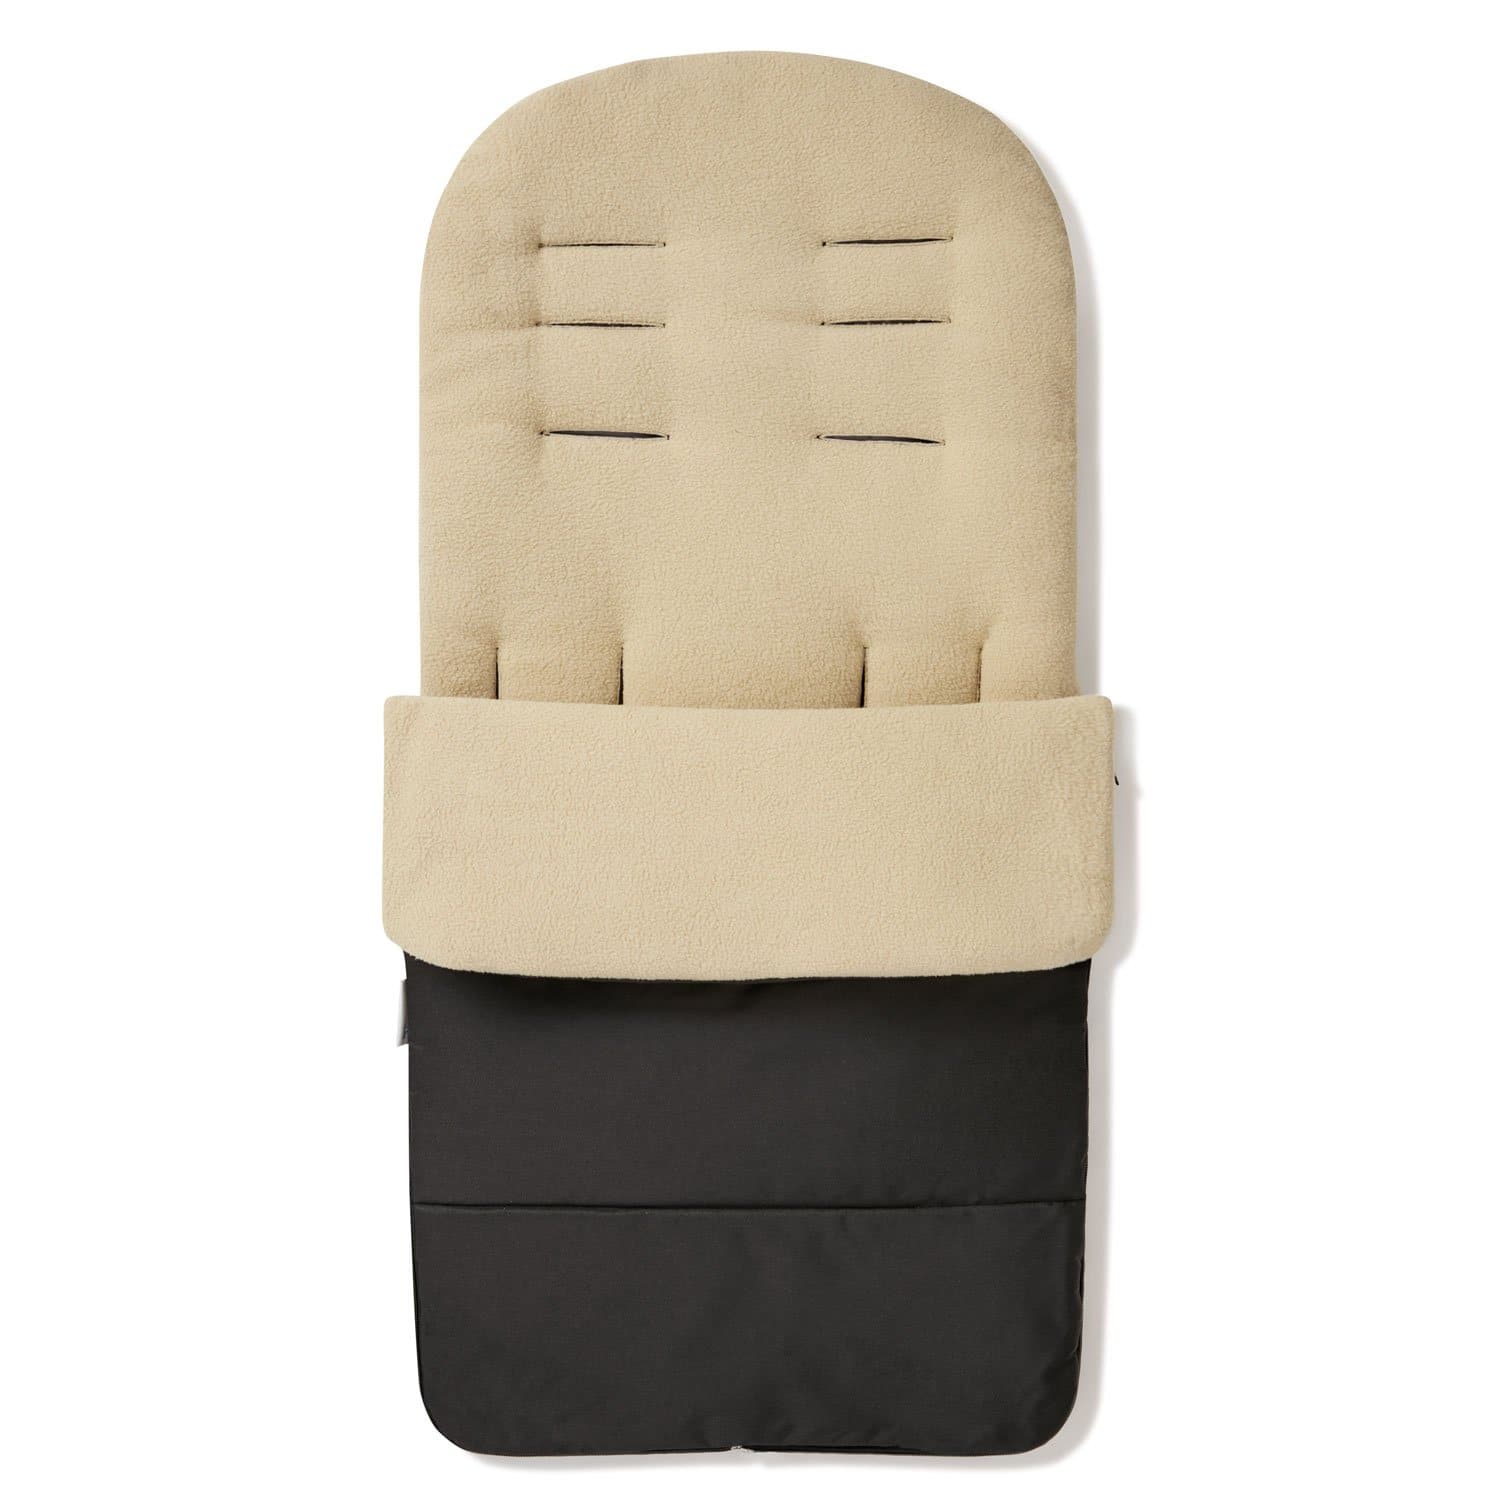 Premium Footmuff / Cosy Toes Compatible with Greentom - Desert Sand / Fits All Models | For Your Little One